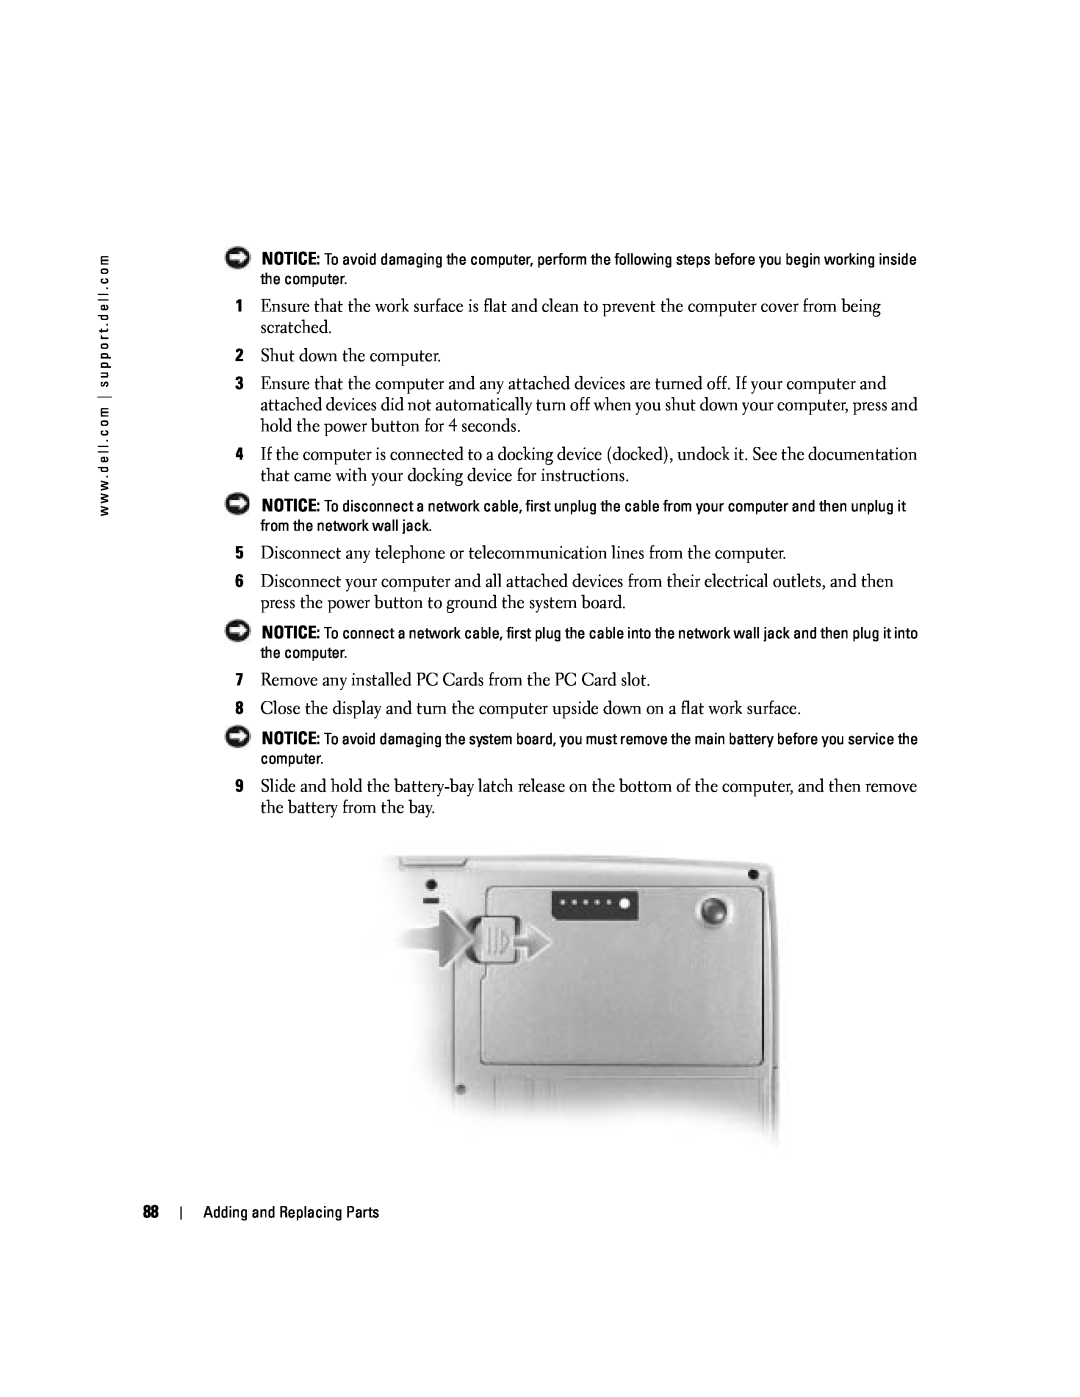 Dell PP10L owner manual Shut down the computer 